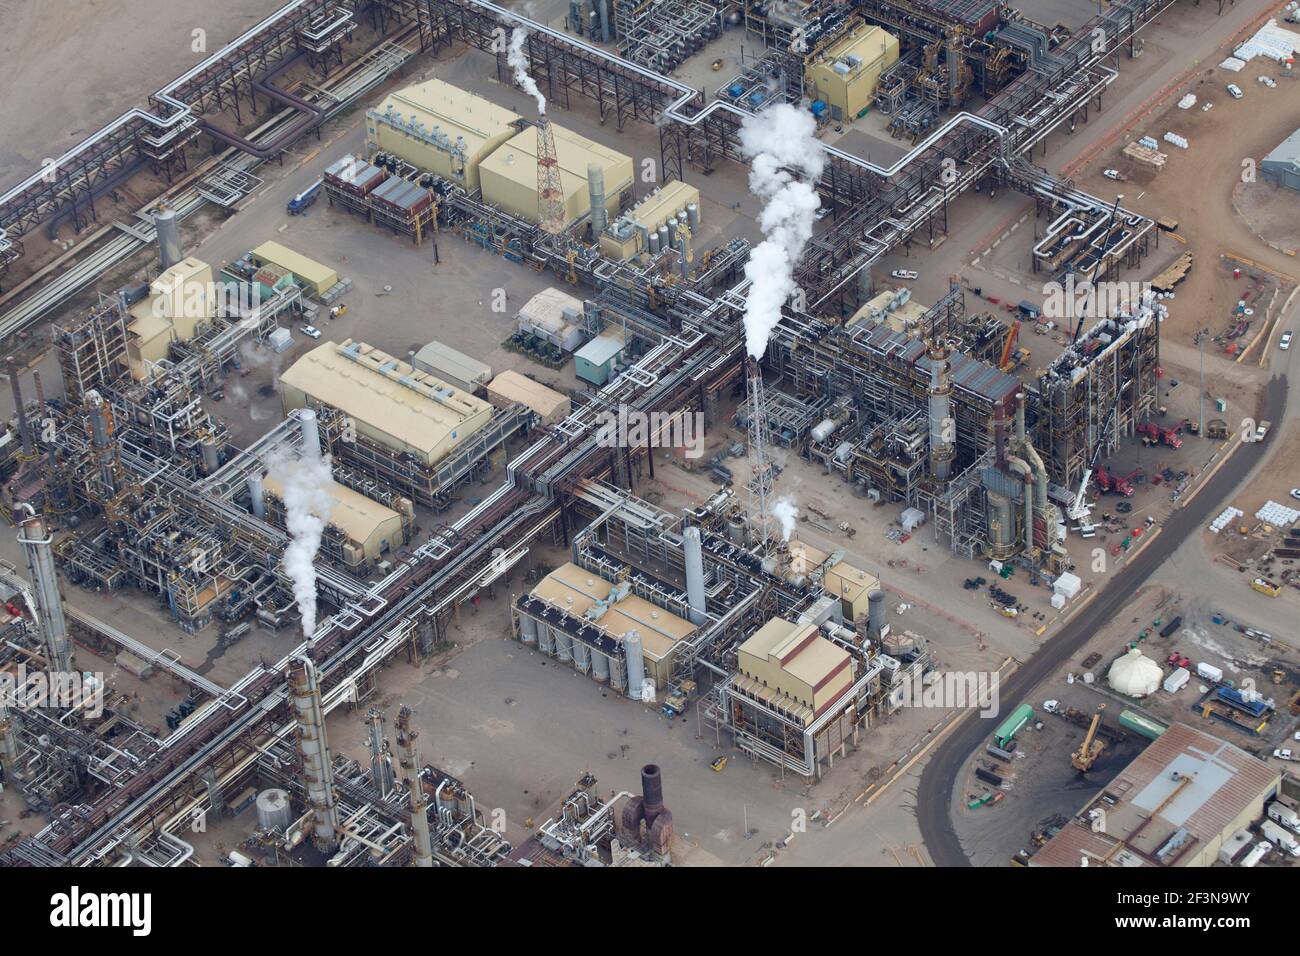 The tar sands, a type of unconventional petroleum deposit, are a major contributor to the Alberta economy. Stock Photo